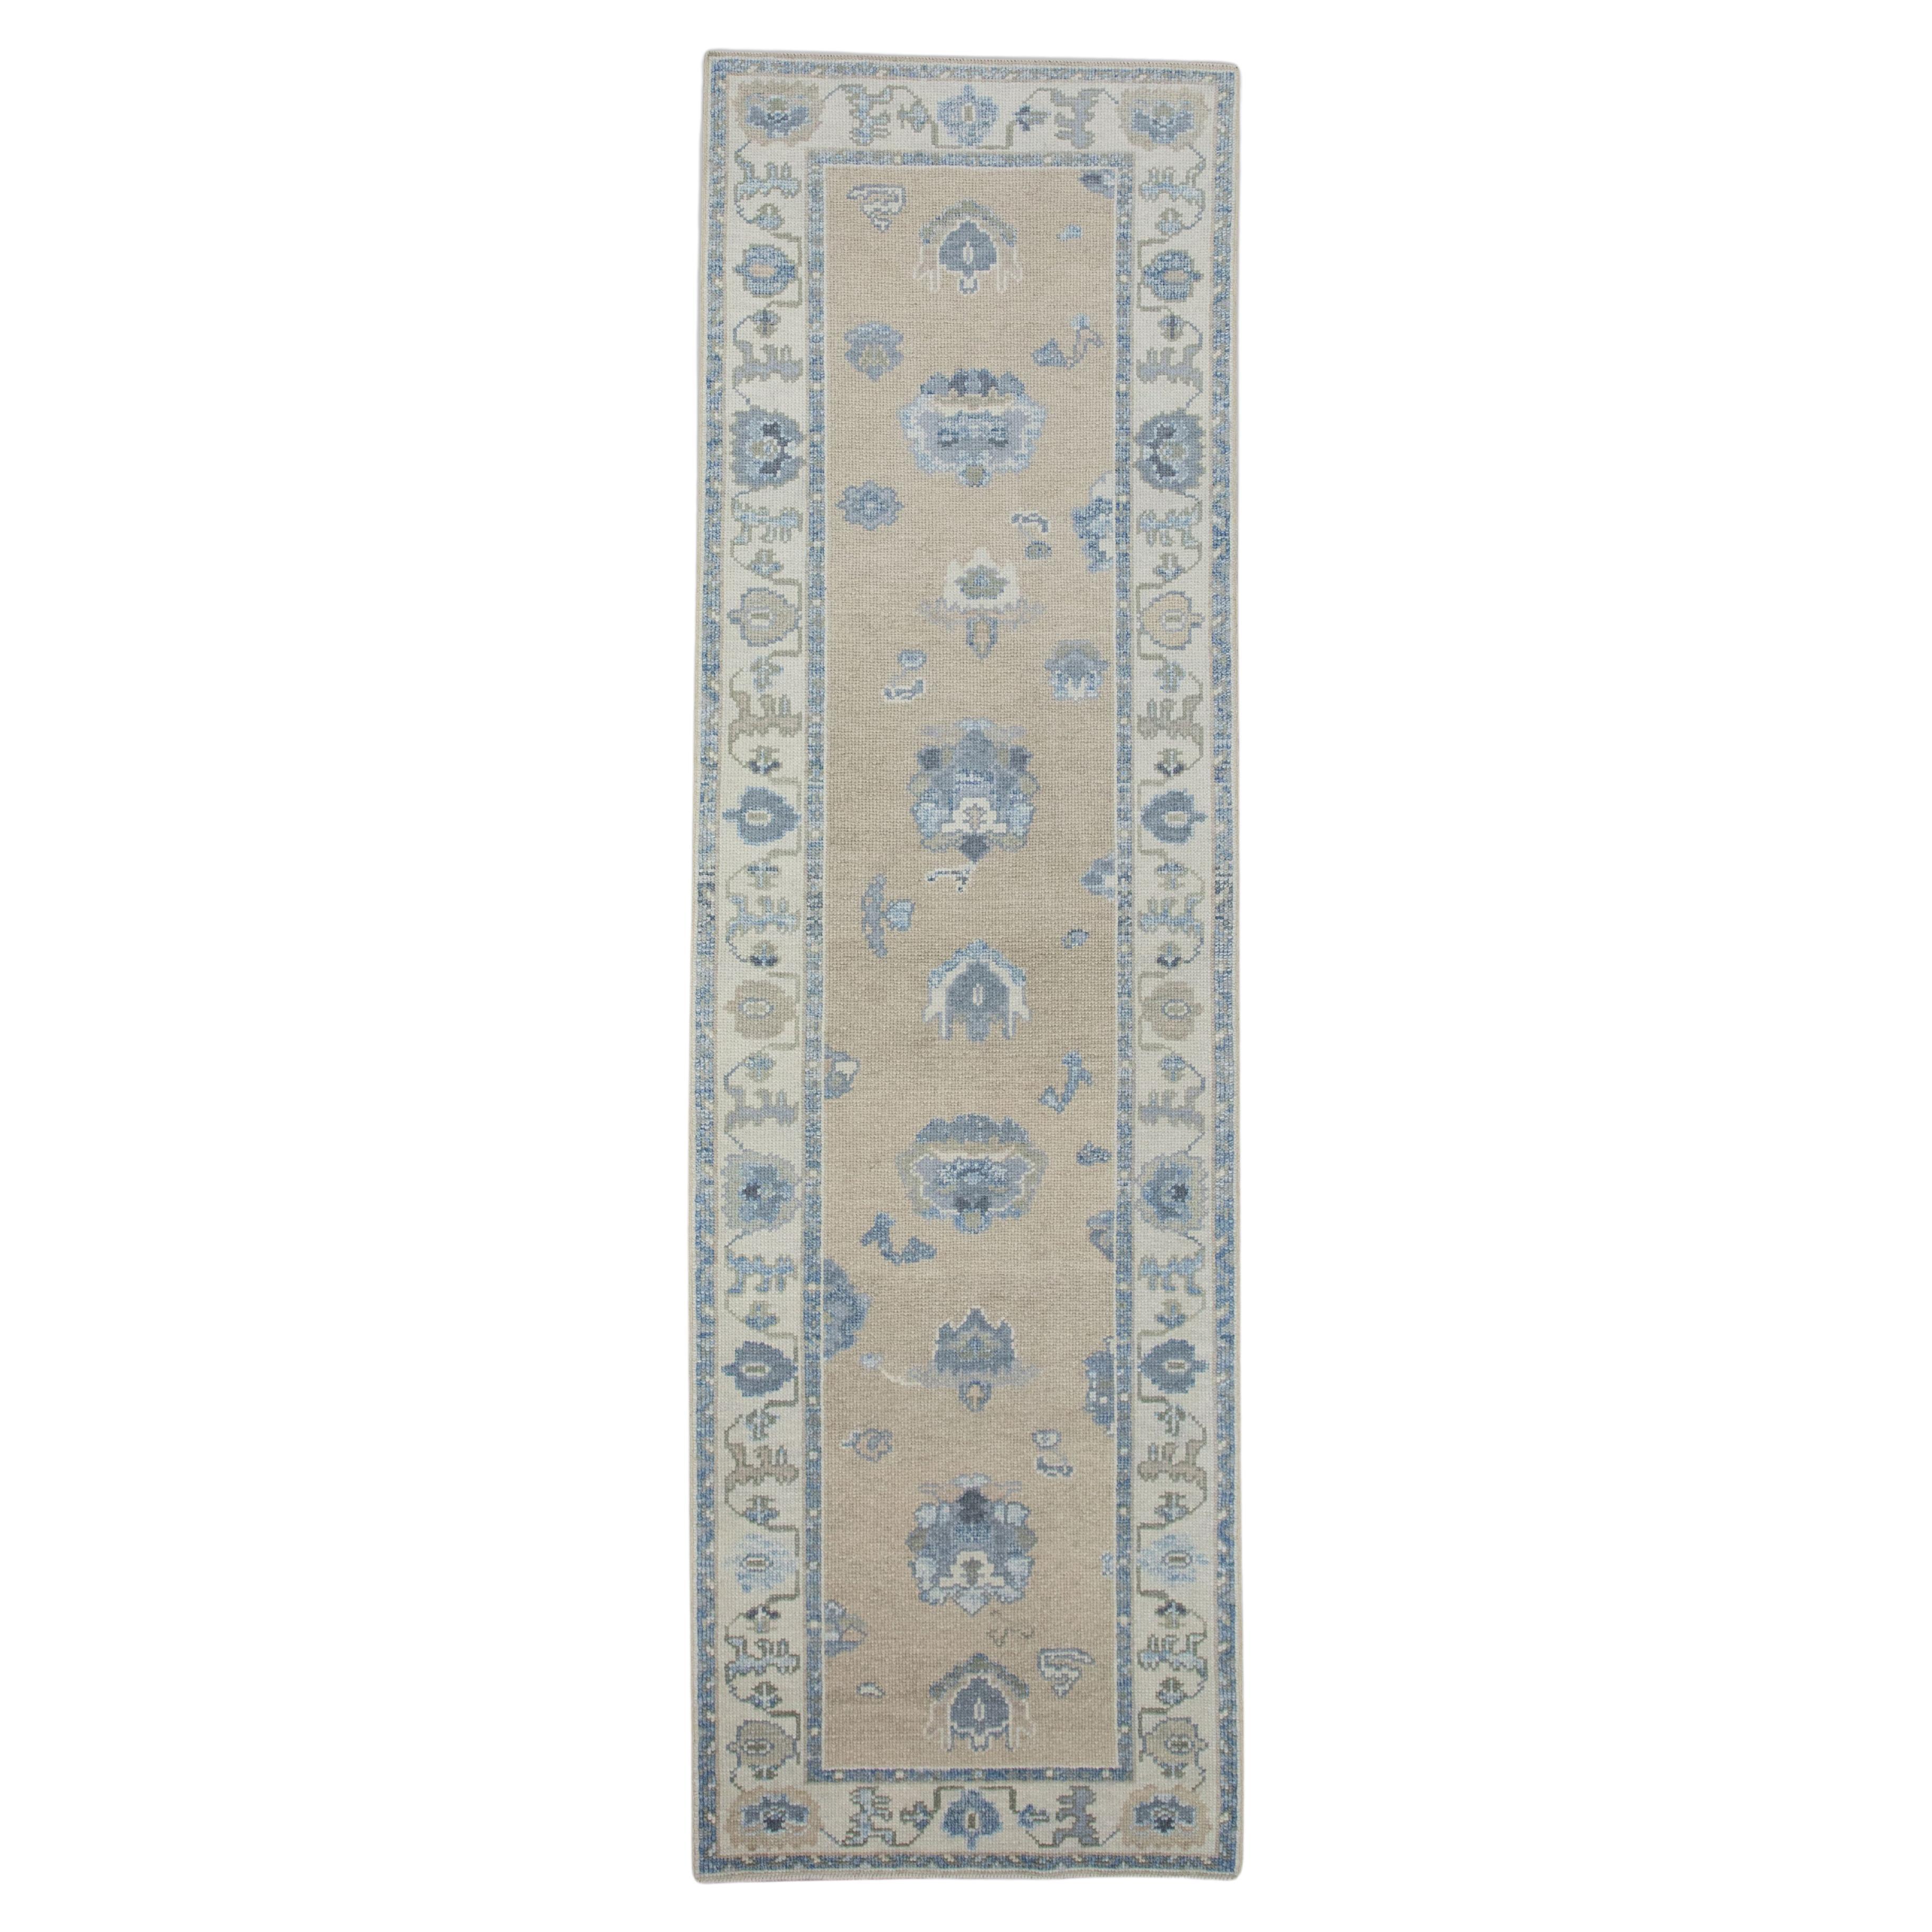 Yellow & Blue Floral Design Handwoven Wool Turkish Oushak Runner 2'10" x 9'7" For Sale